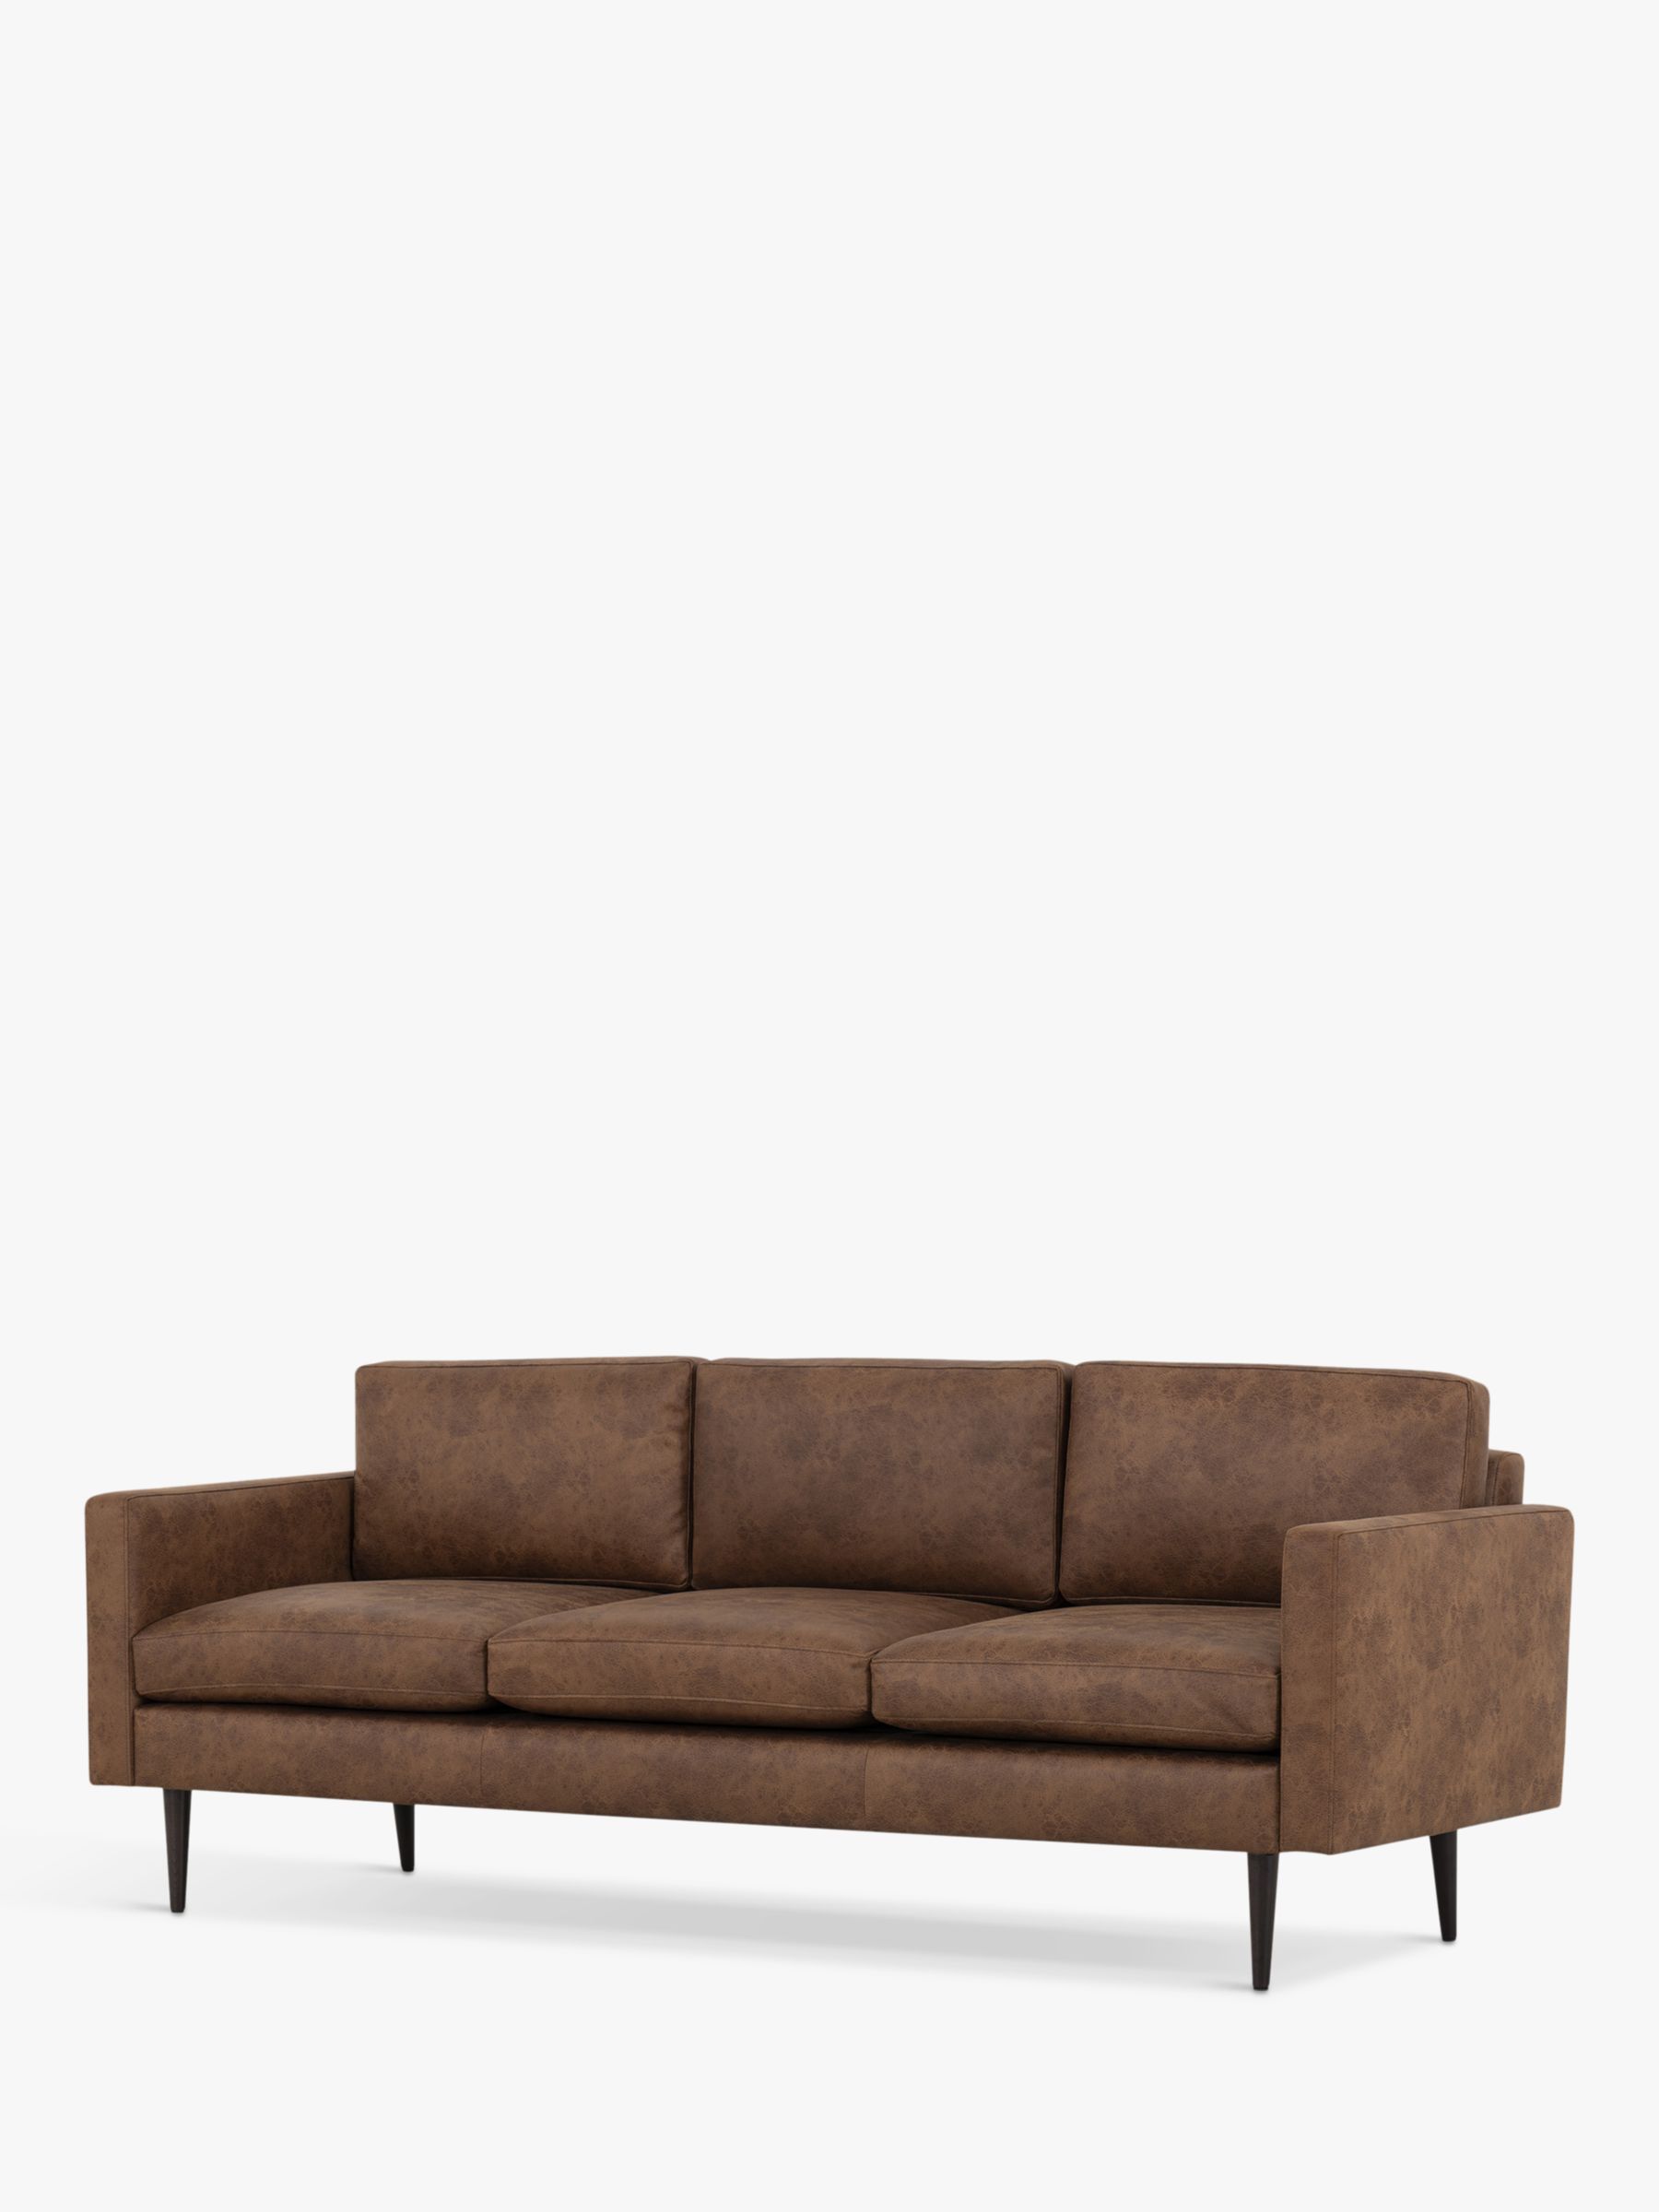 Swyft Model 01 Large 3 Seater Faux Leather Sofa